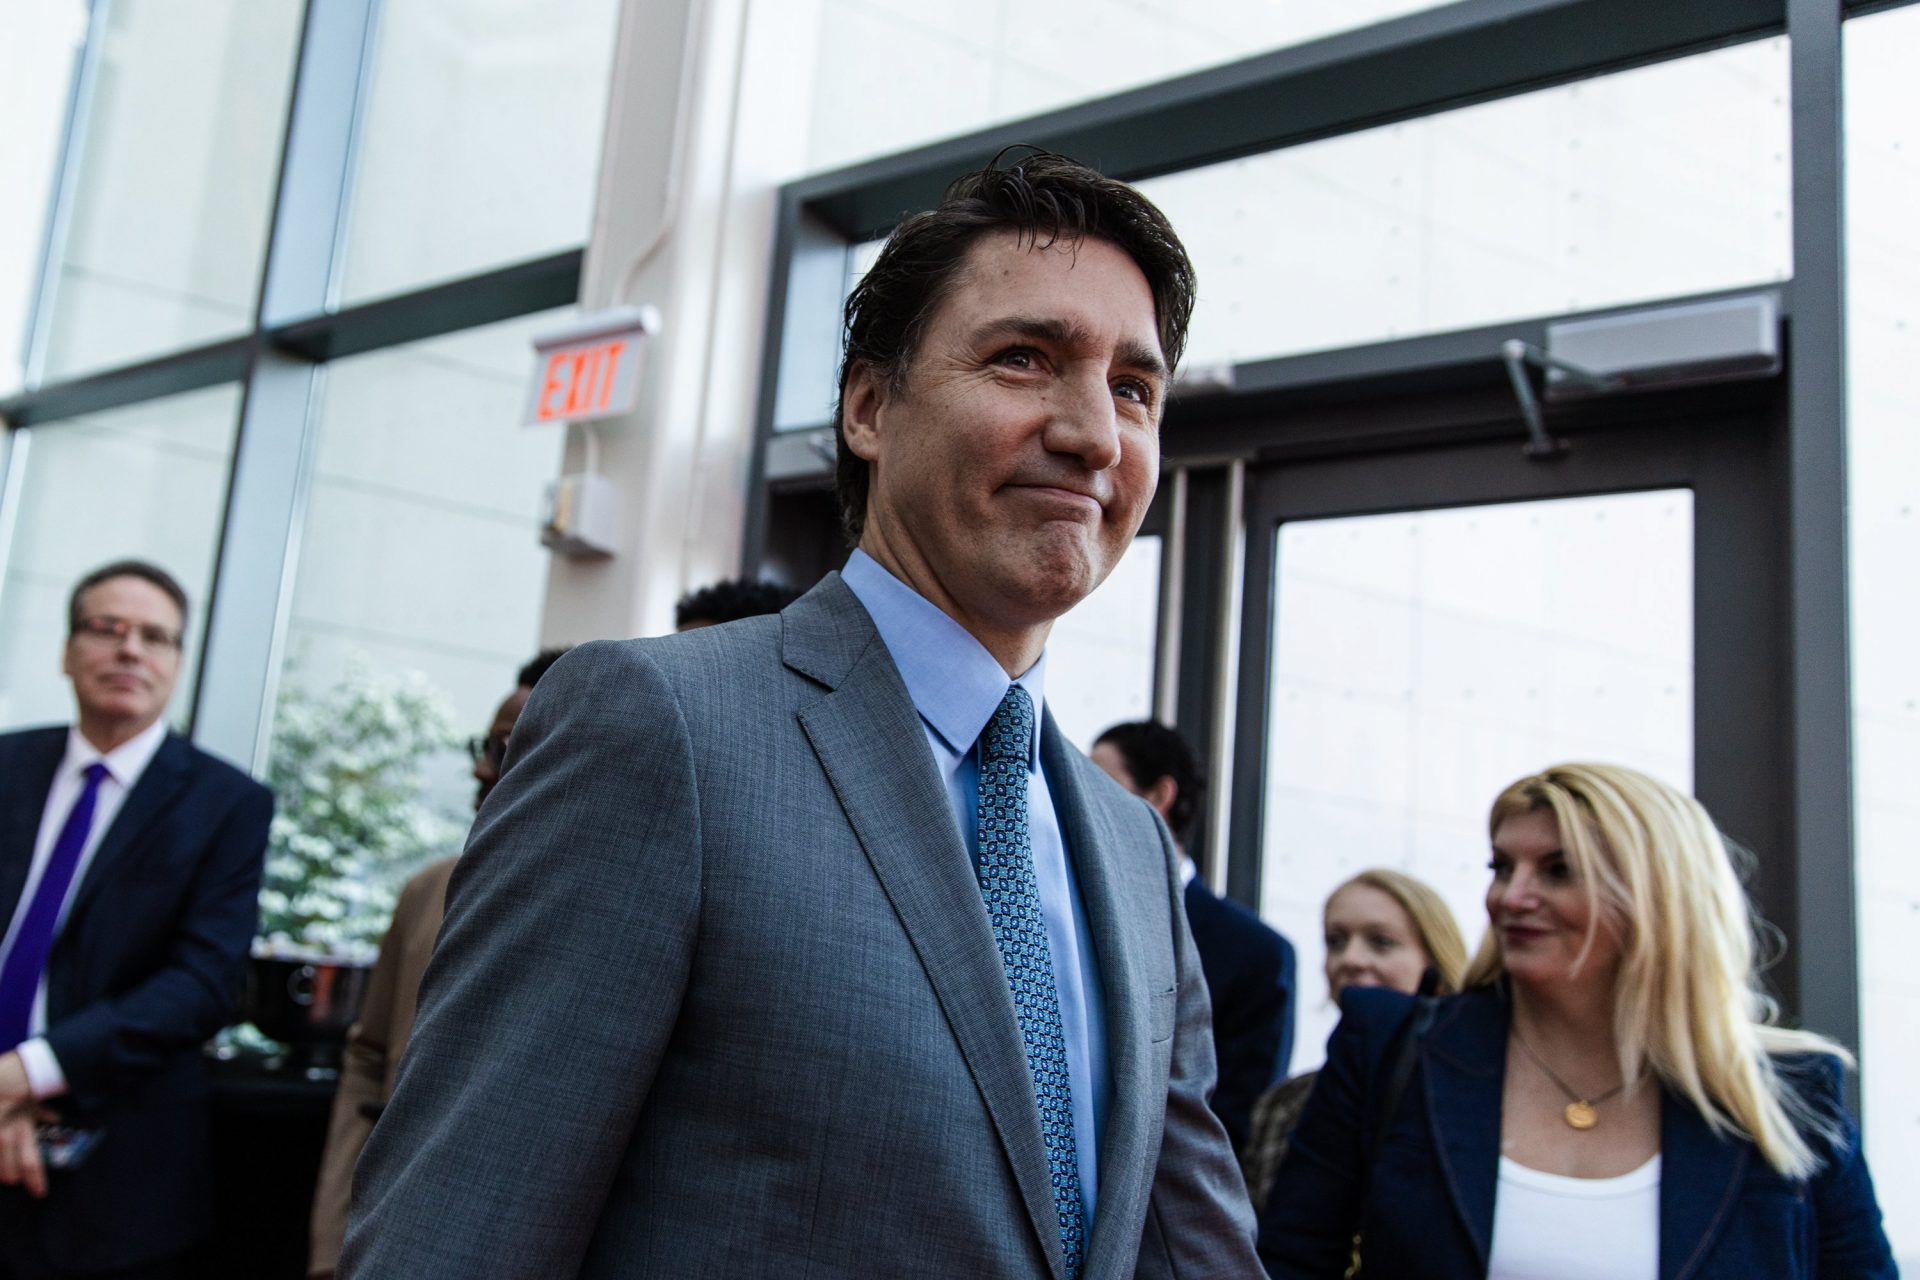 Most Canadians want Trudeau to go